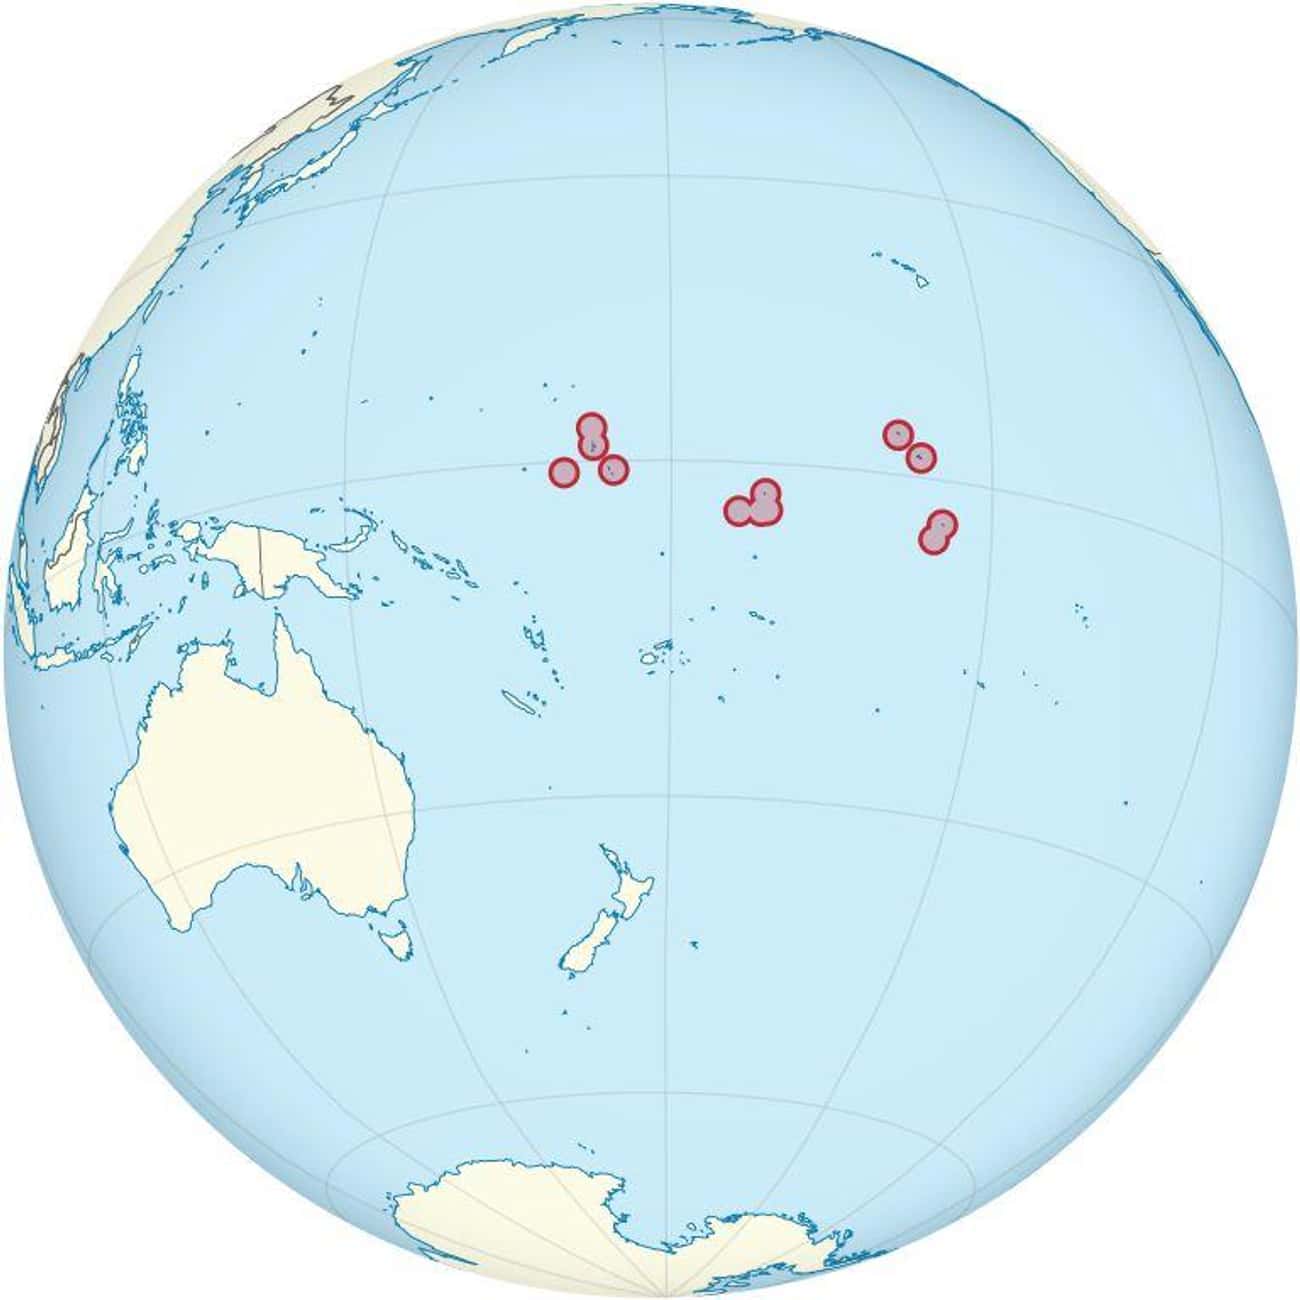 Kiribati Is The Only Country Located In All Four Hemispheres